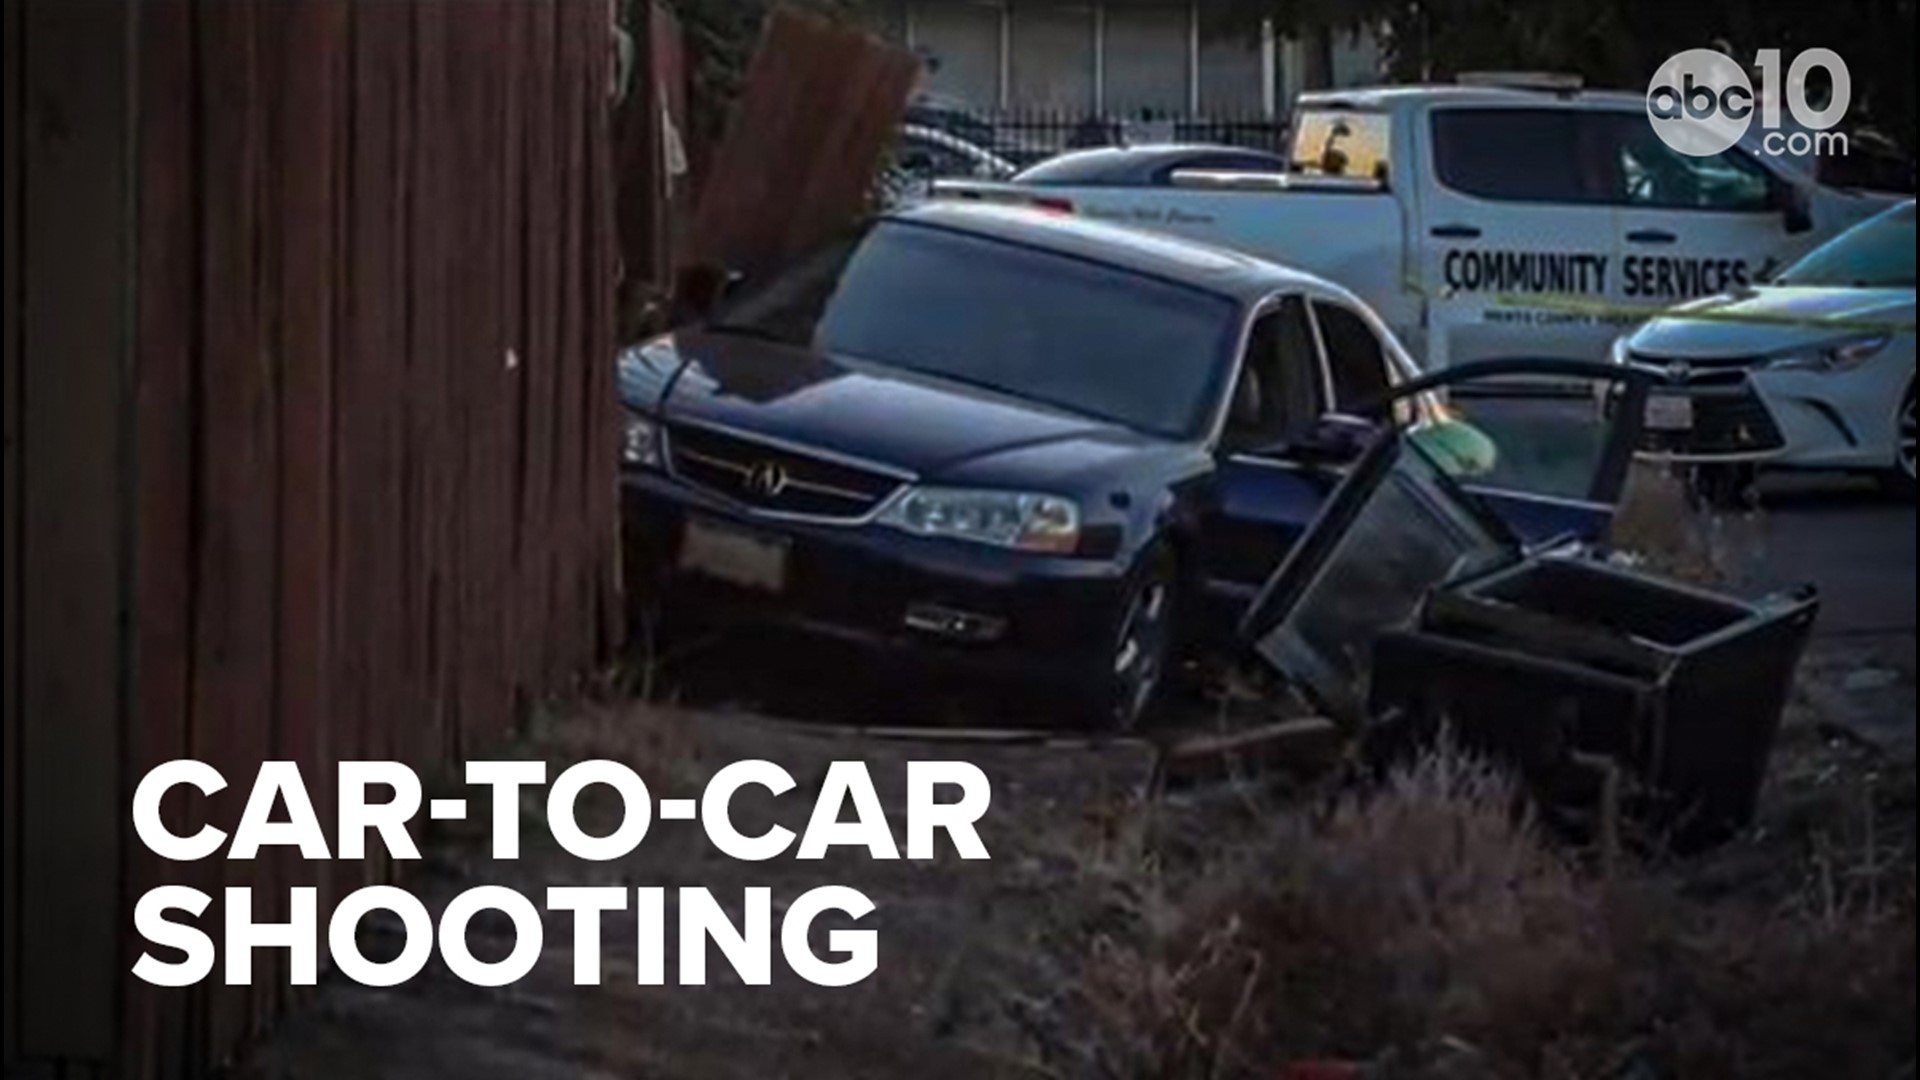 Deputies with the Sacramento County Sheriff's Office say a car crashed into a fence as a result of a vehicle-to-vehicle shooting, Thursday.